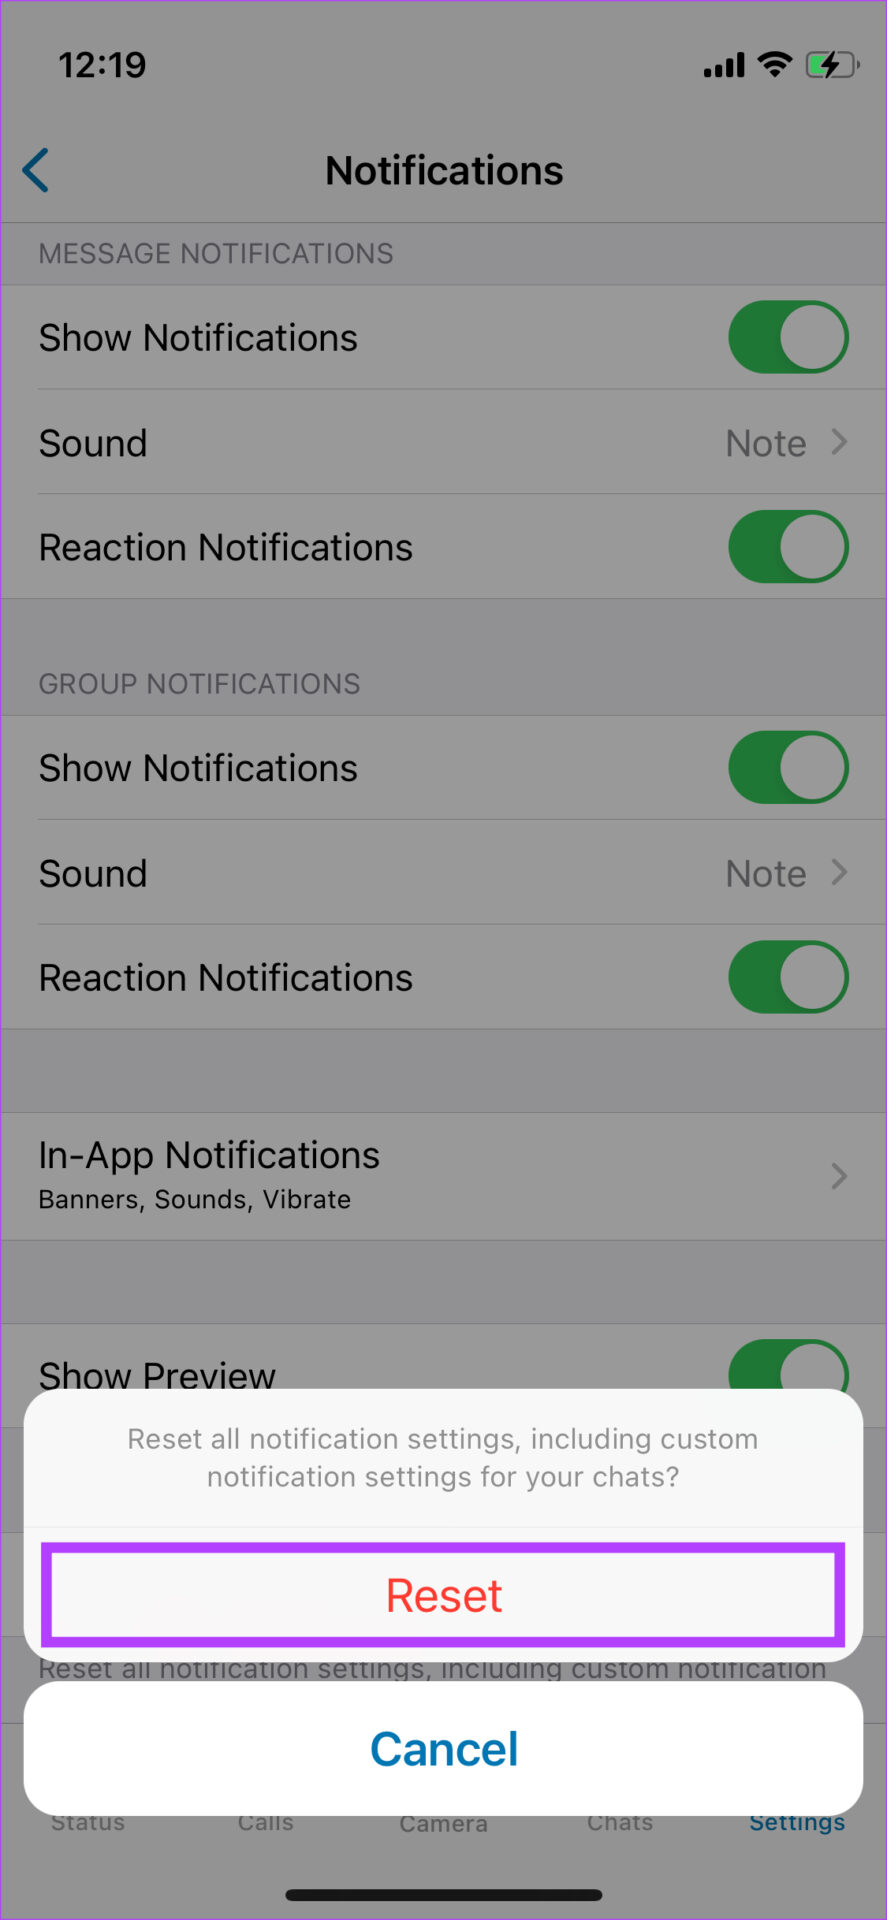 Top 10 Ways to Fix Delayed WhatsApp Notifications on iPhone - 22